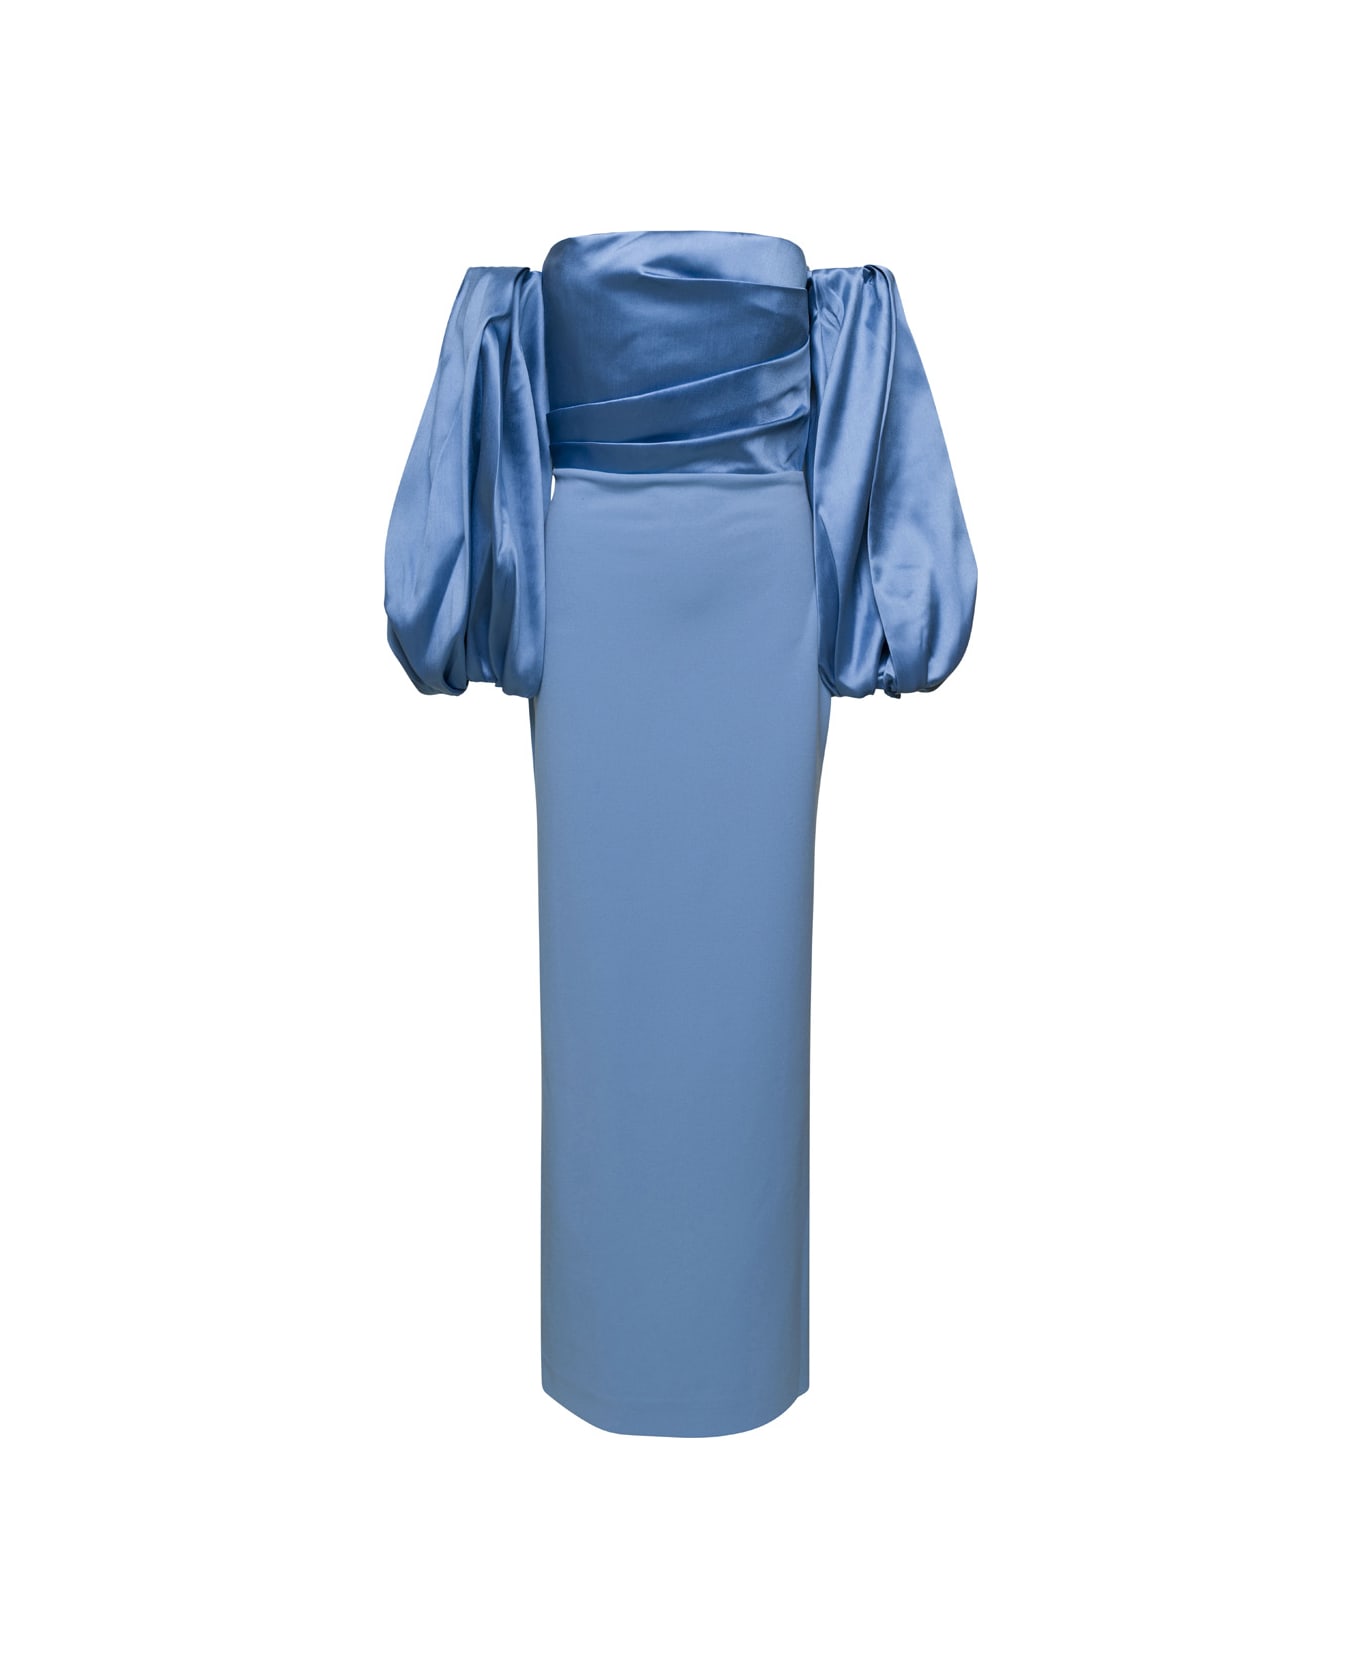 Solace London Light Blue Maxi Dress With Puffed Sleeves In Techno Fabric Woman - Blu